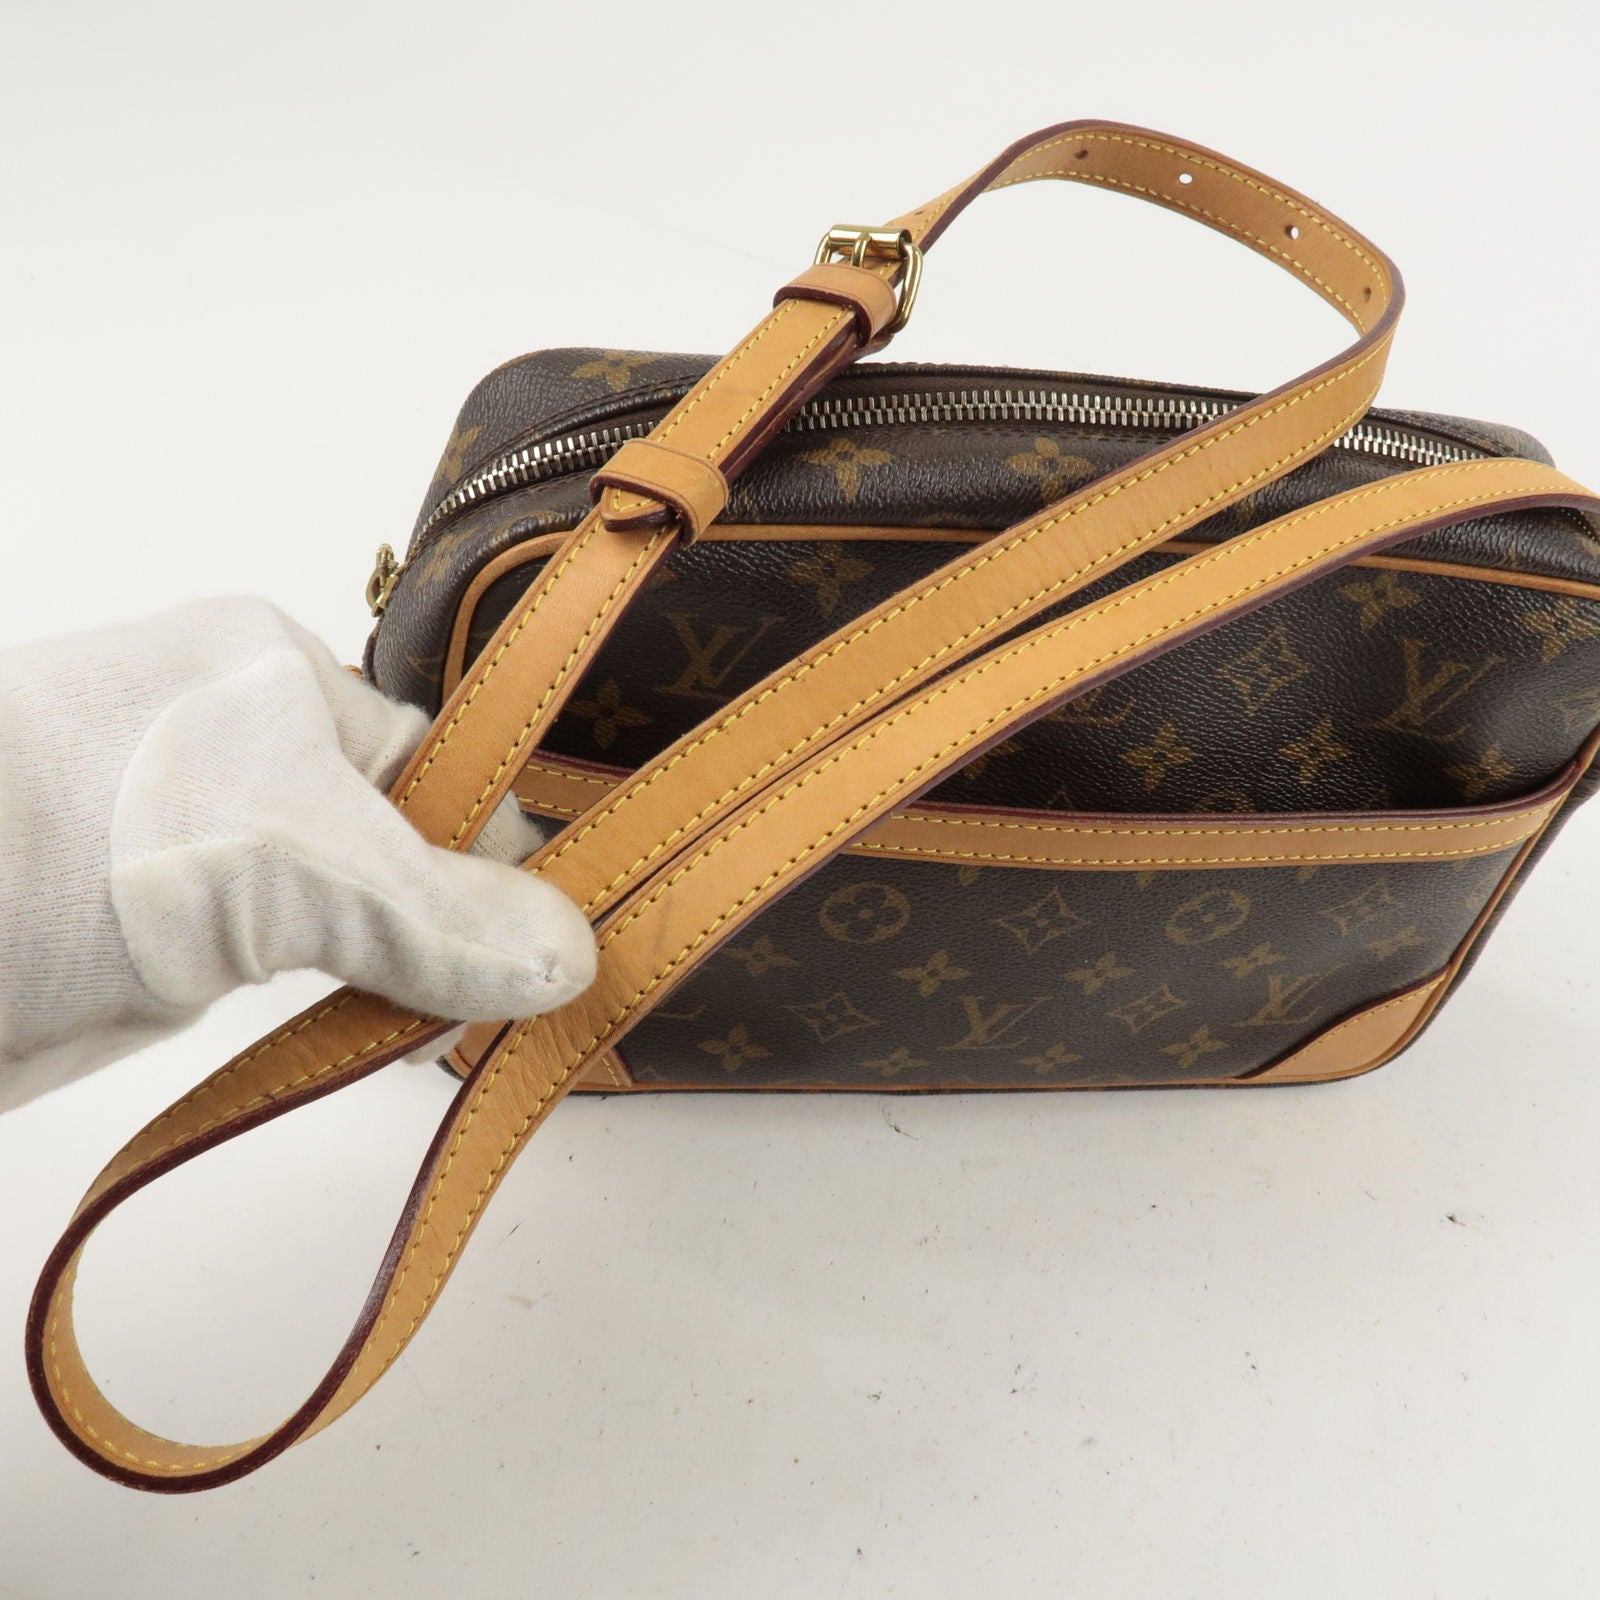 Louis Vuitton 2007 Pre-owned Beverly mm Shoulder Bag - Brown